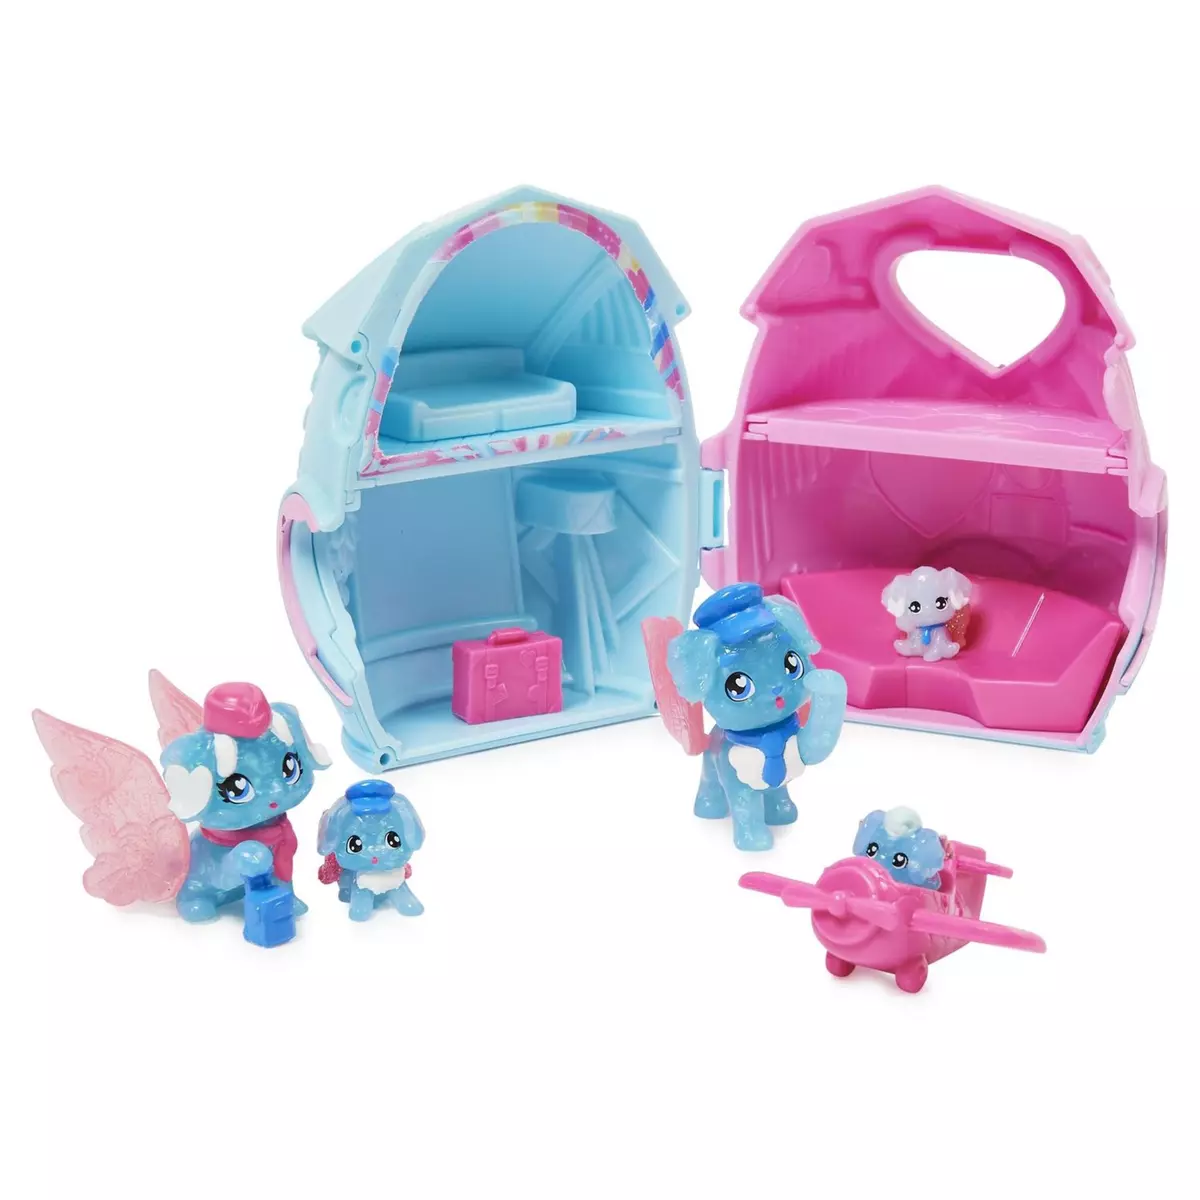 SPIN MASTER Playset Maison 4 Famille Surprise 